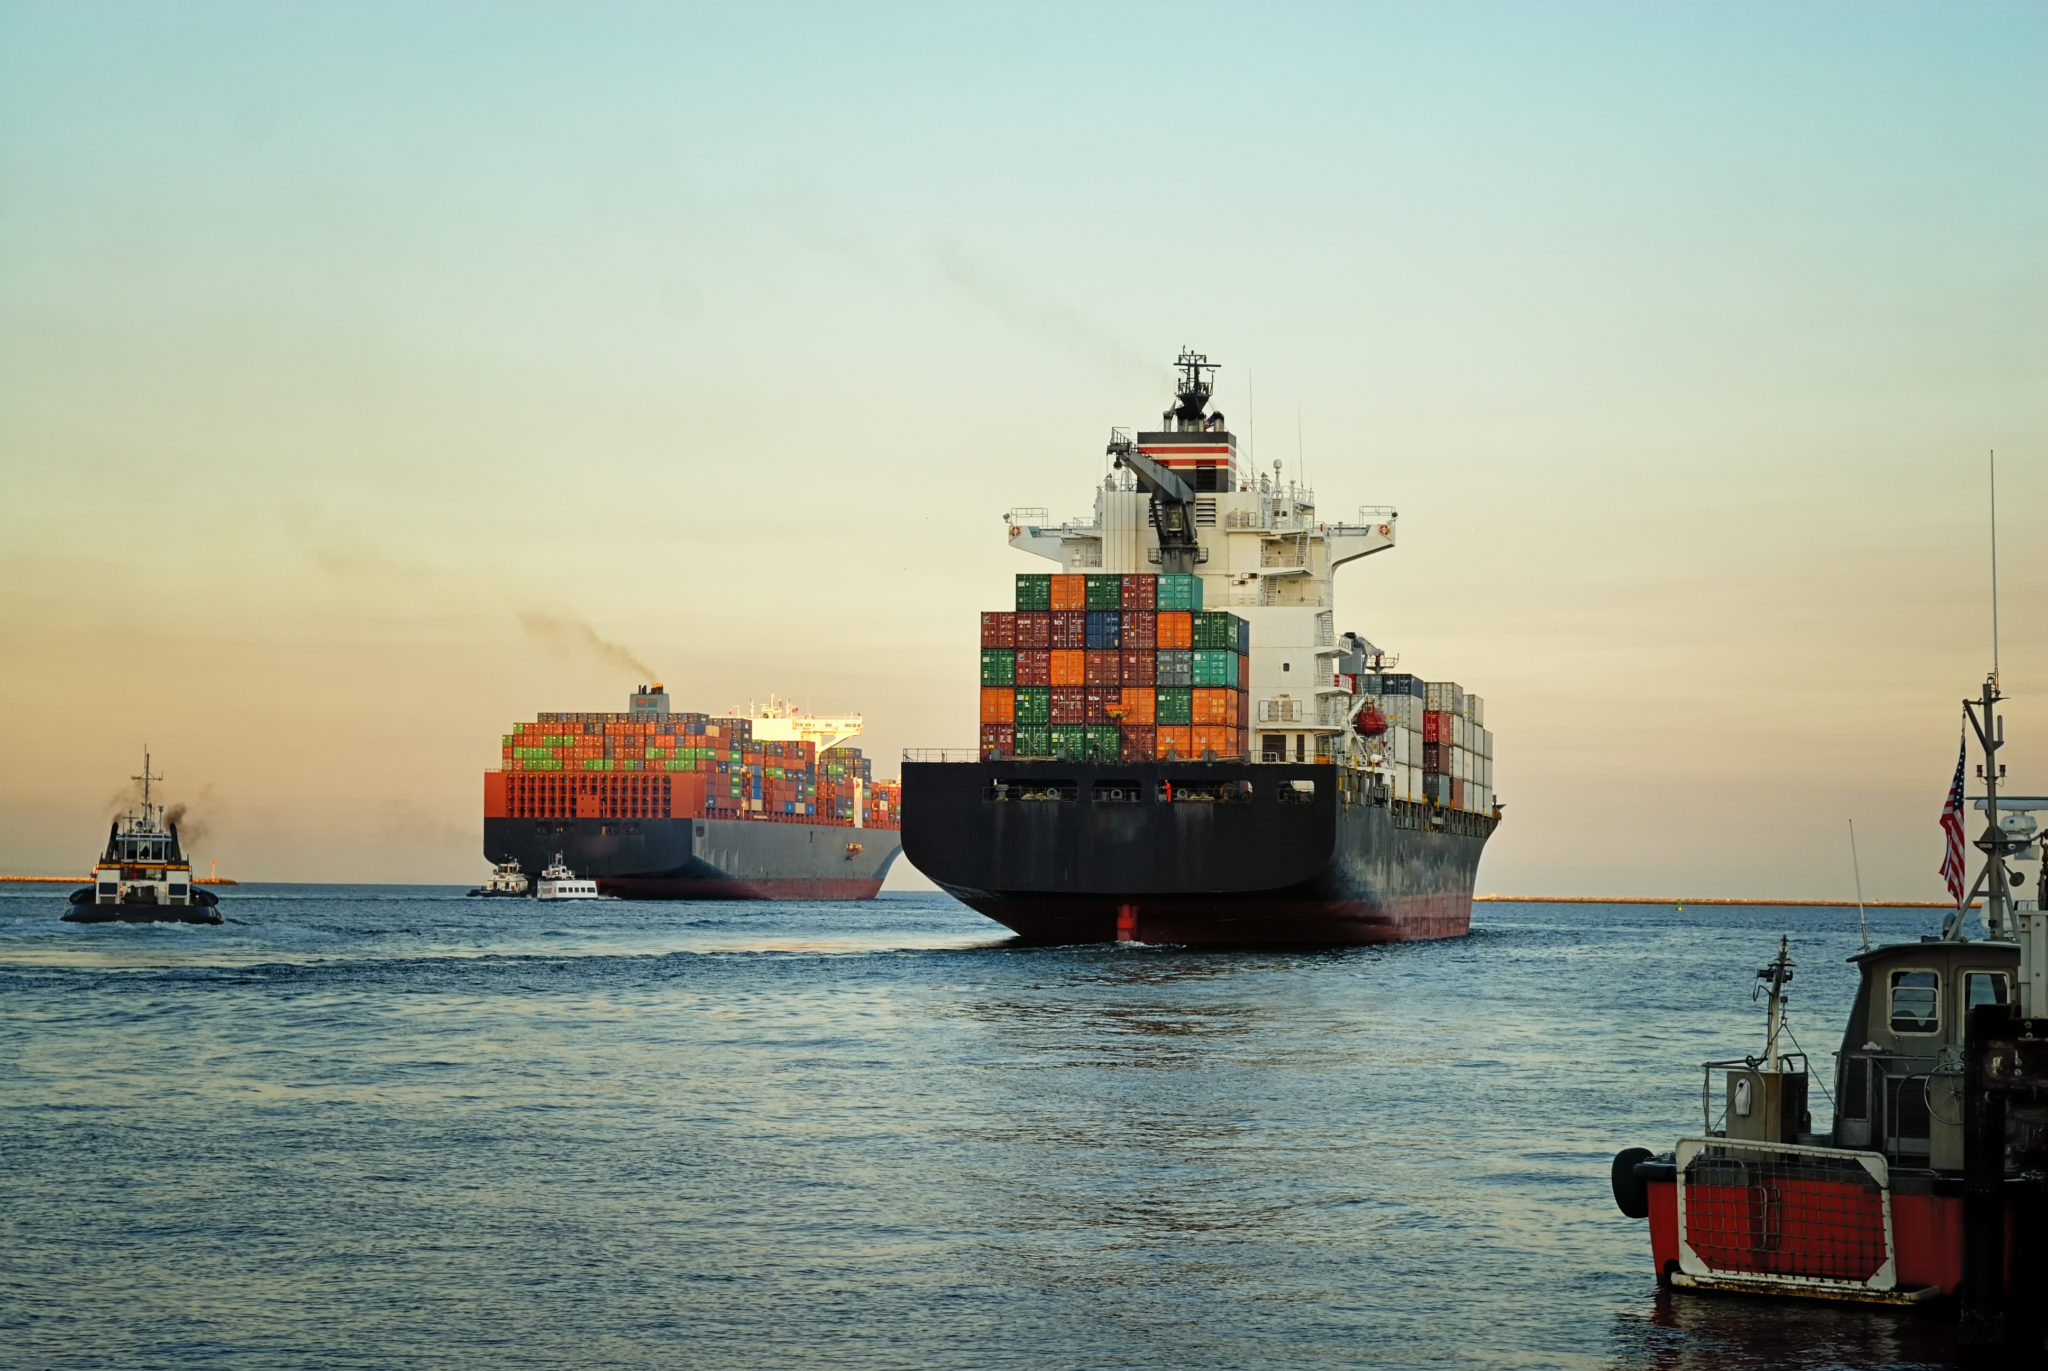 Does shipping need a licence to sail?